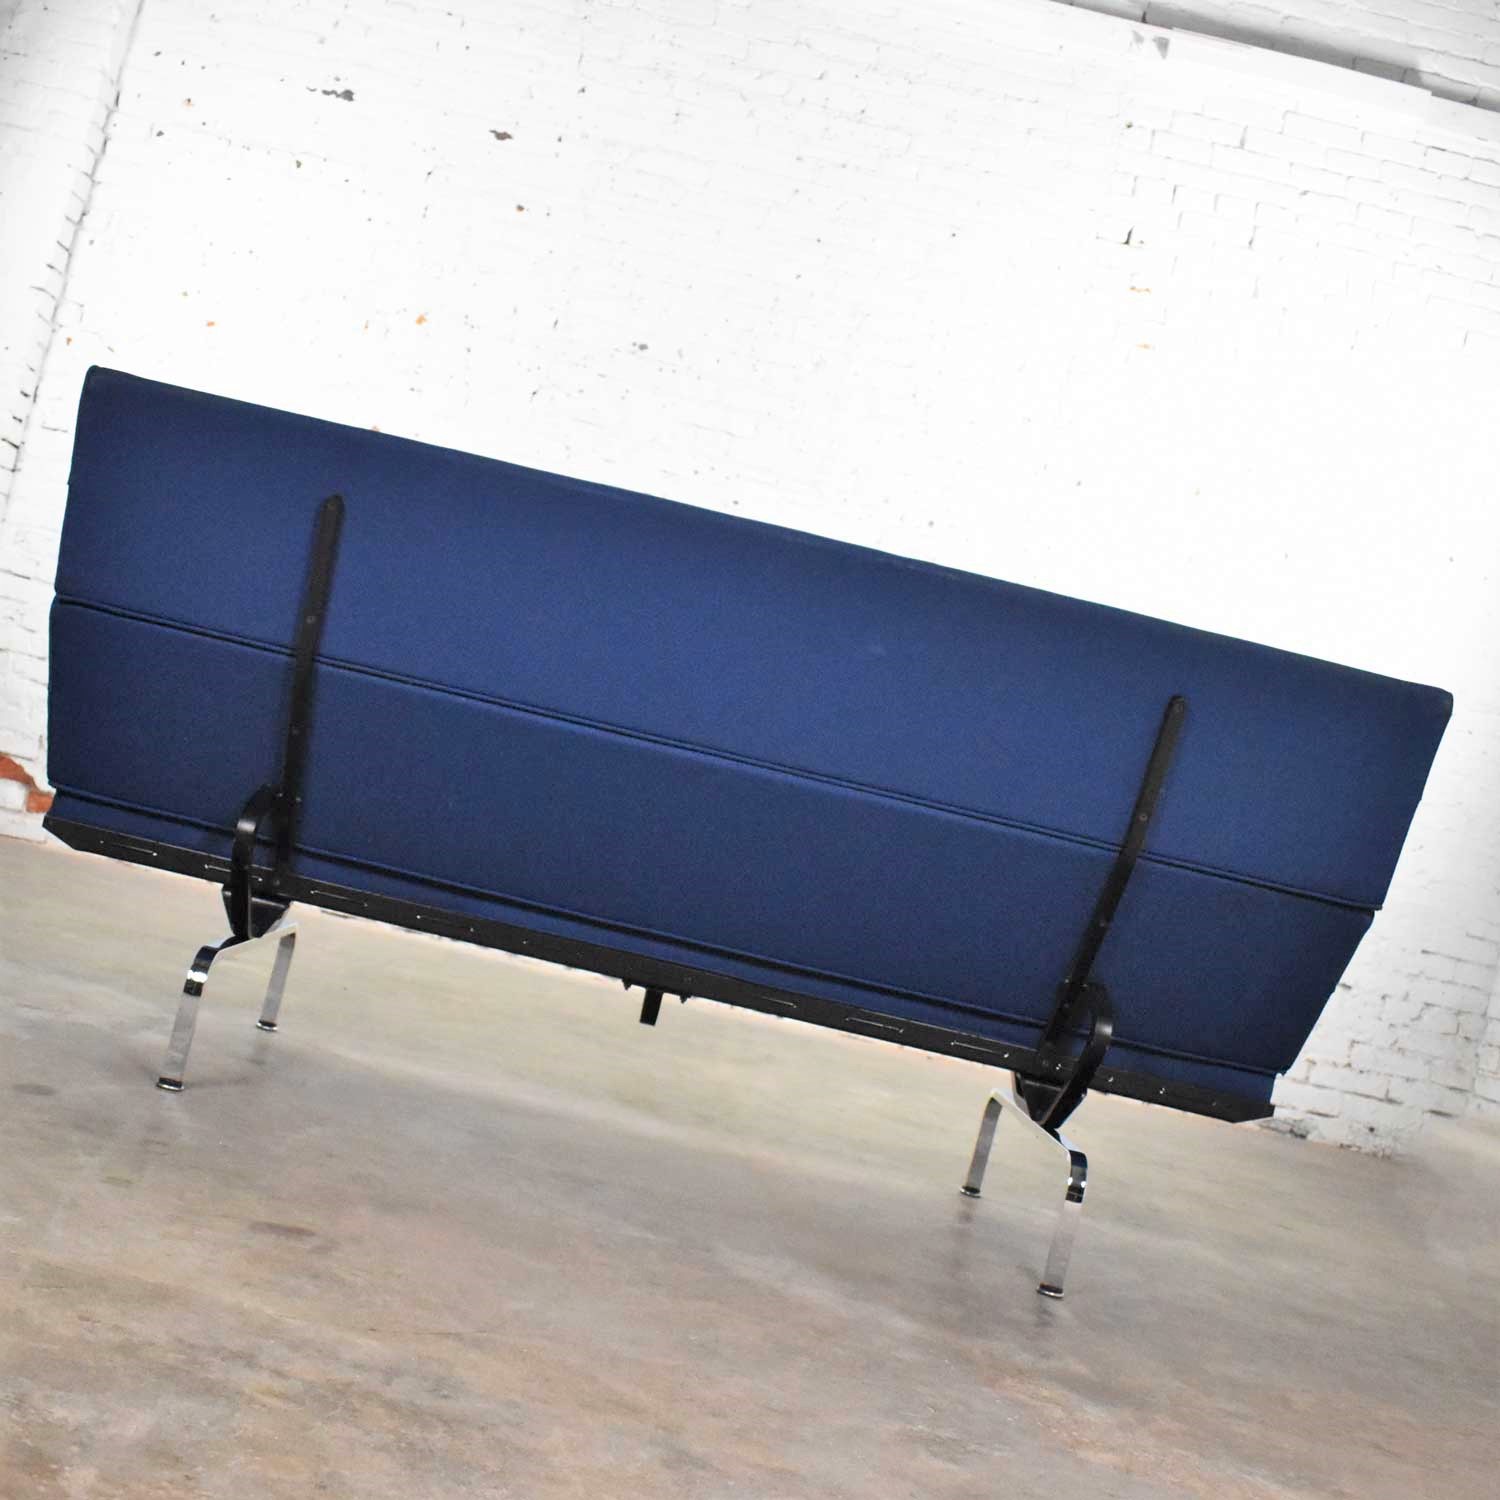 Vintage Mid-Century Modern Eames Sofa Compact in Blue by Herman Miller